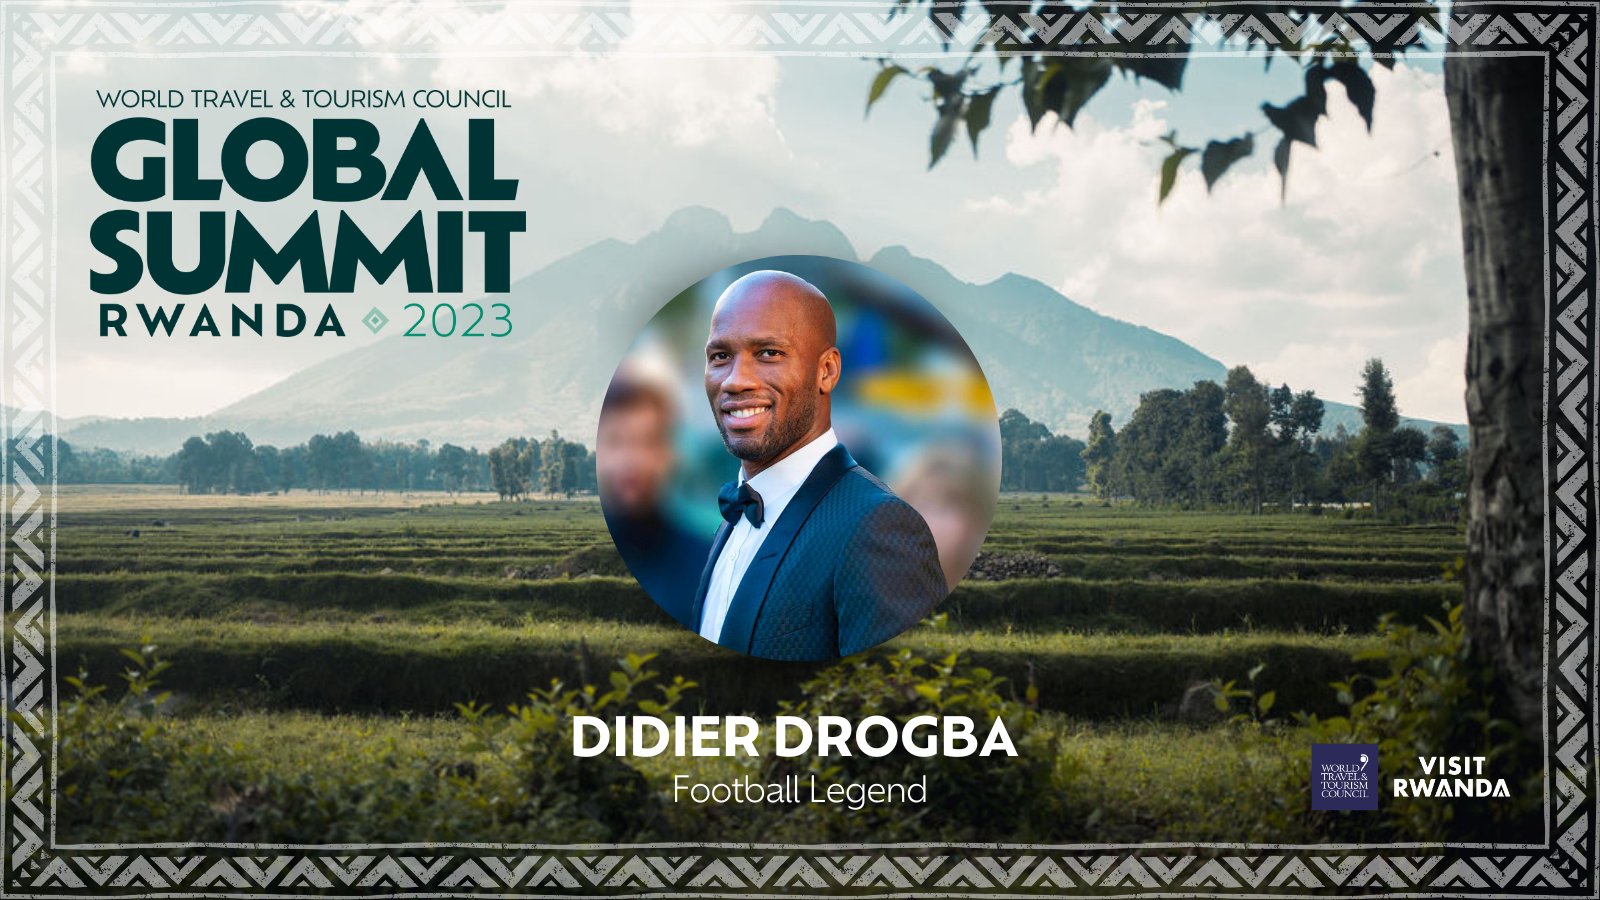 Kigali to Host Global Summit Showcasing Prominent Figures in Travel and Tourism